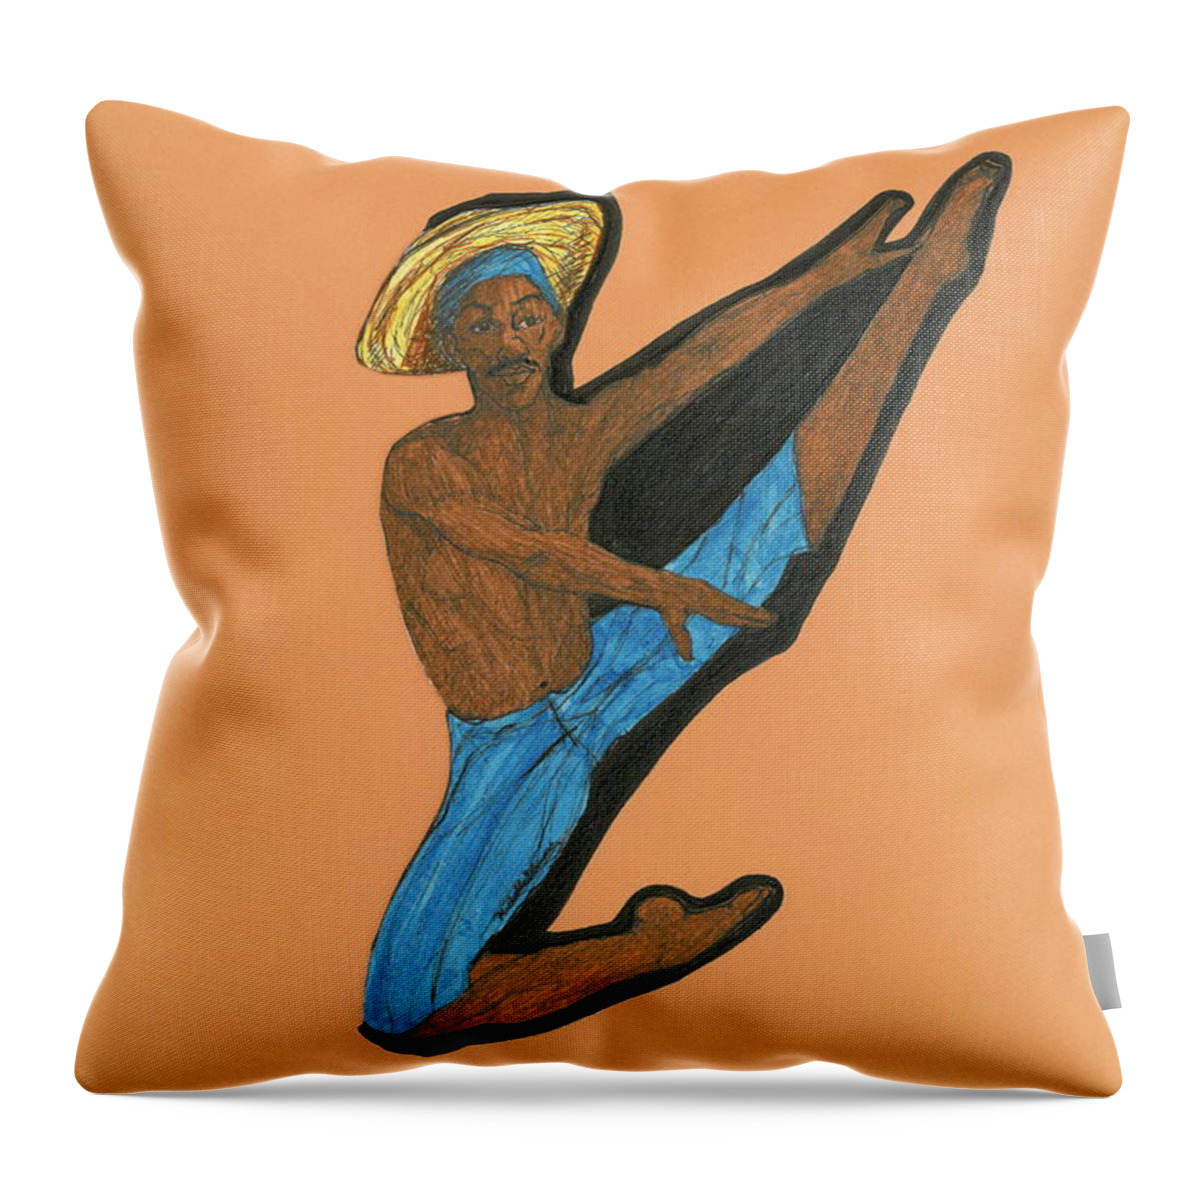 Dancer Throw Pillow featuring the painting Dancer by Michelle Gilmore